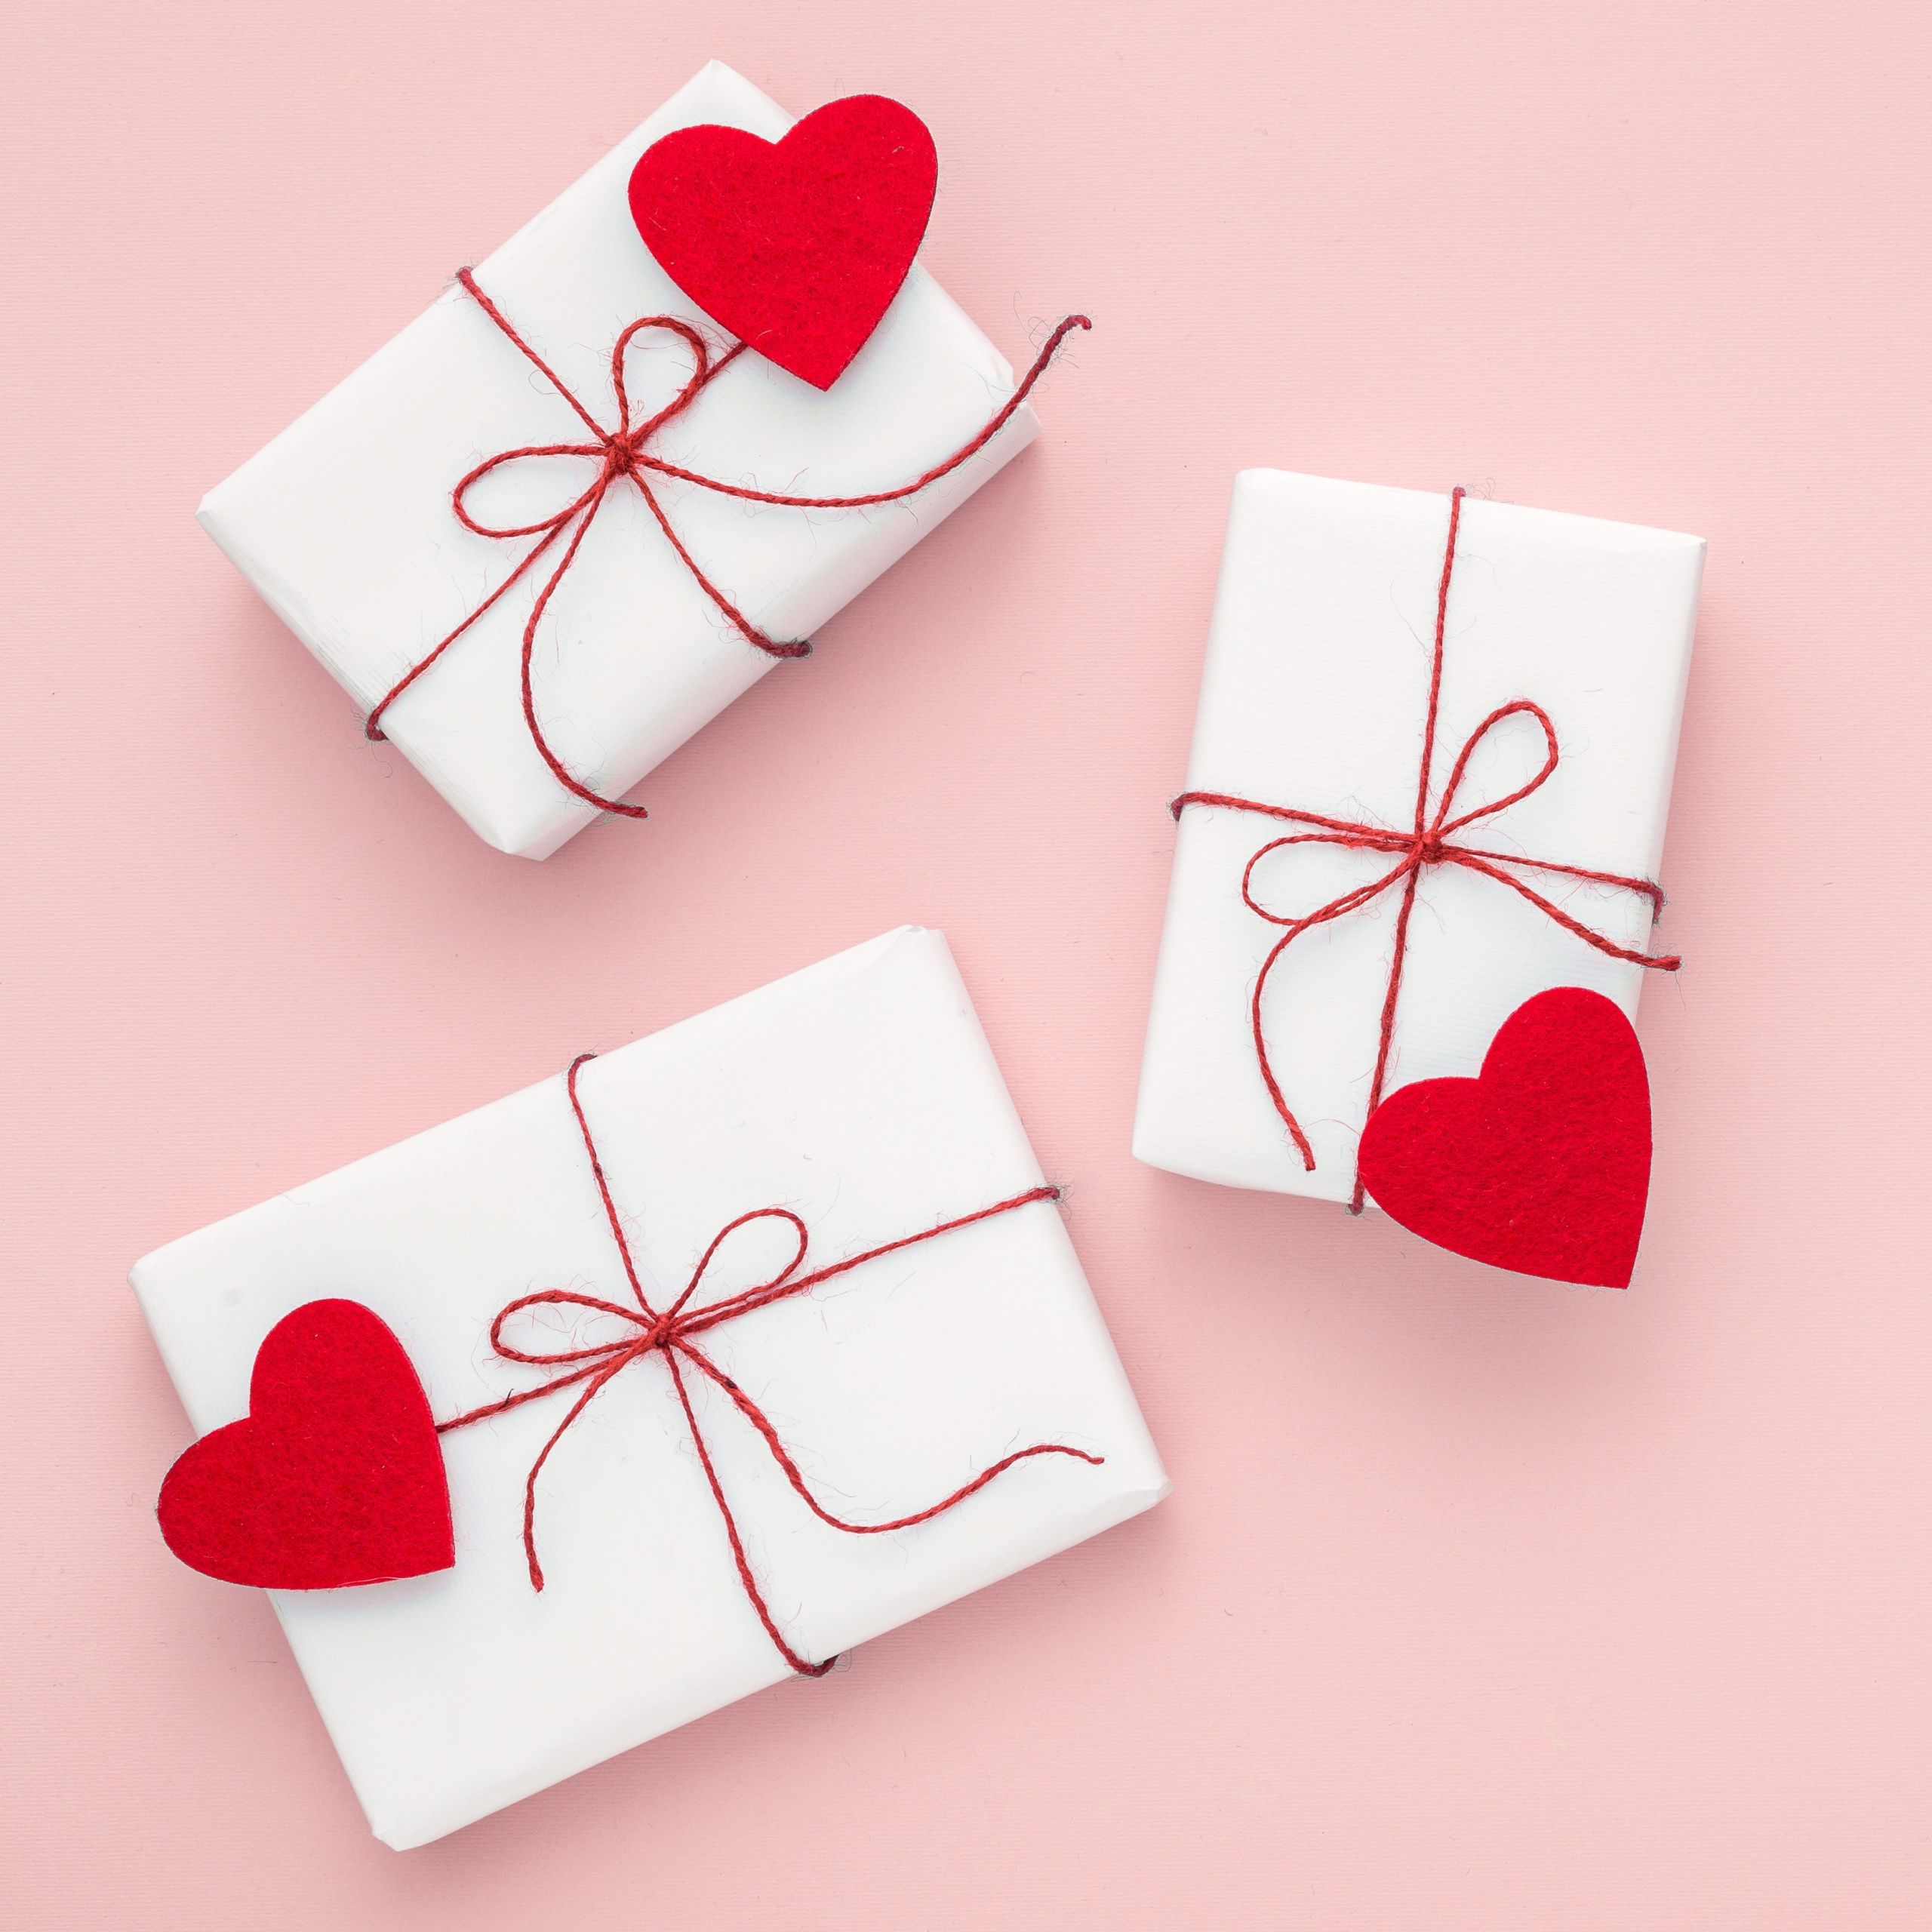 Valentines Day Gifts Amazon Beautiful Most Popular Valentine S Day Gifts On Amazon